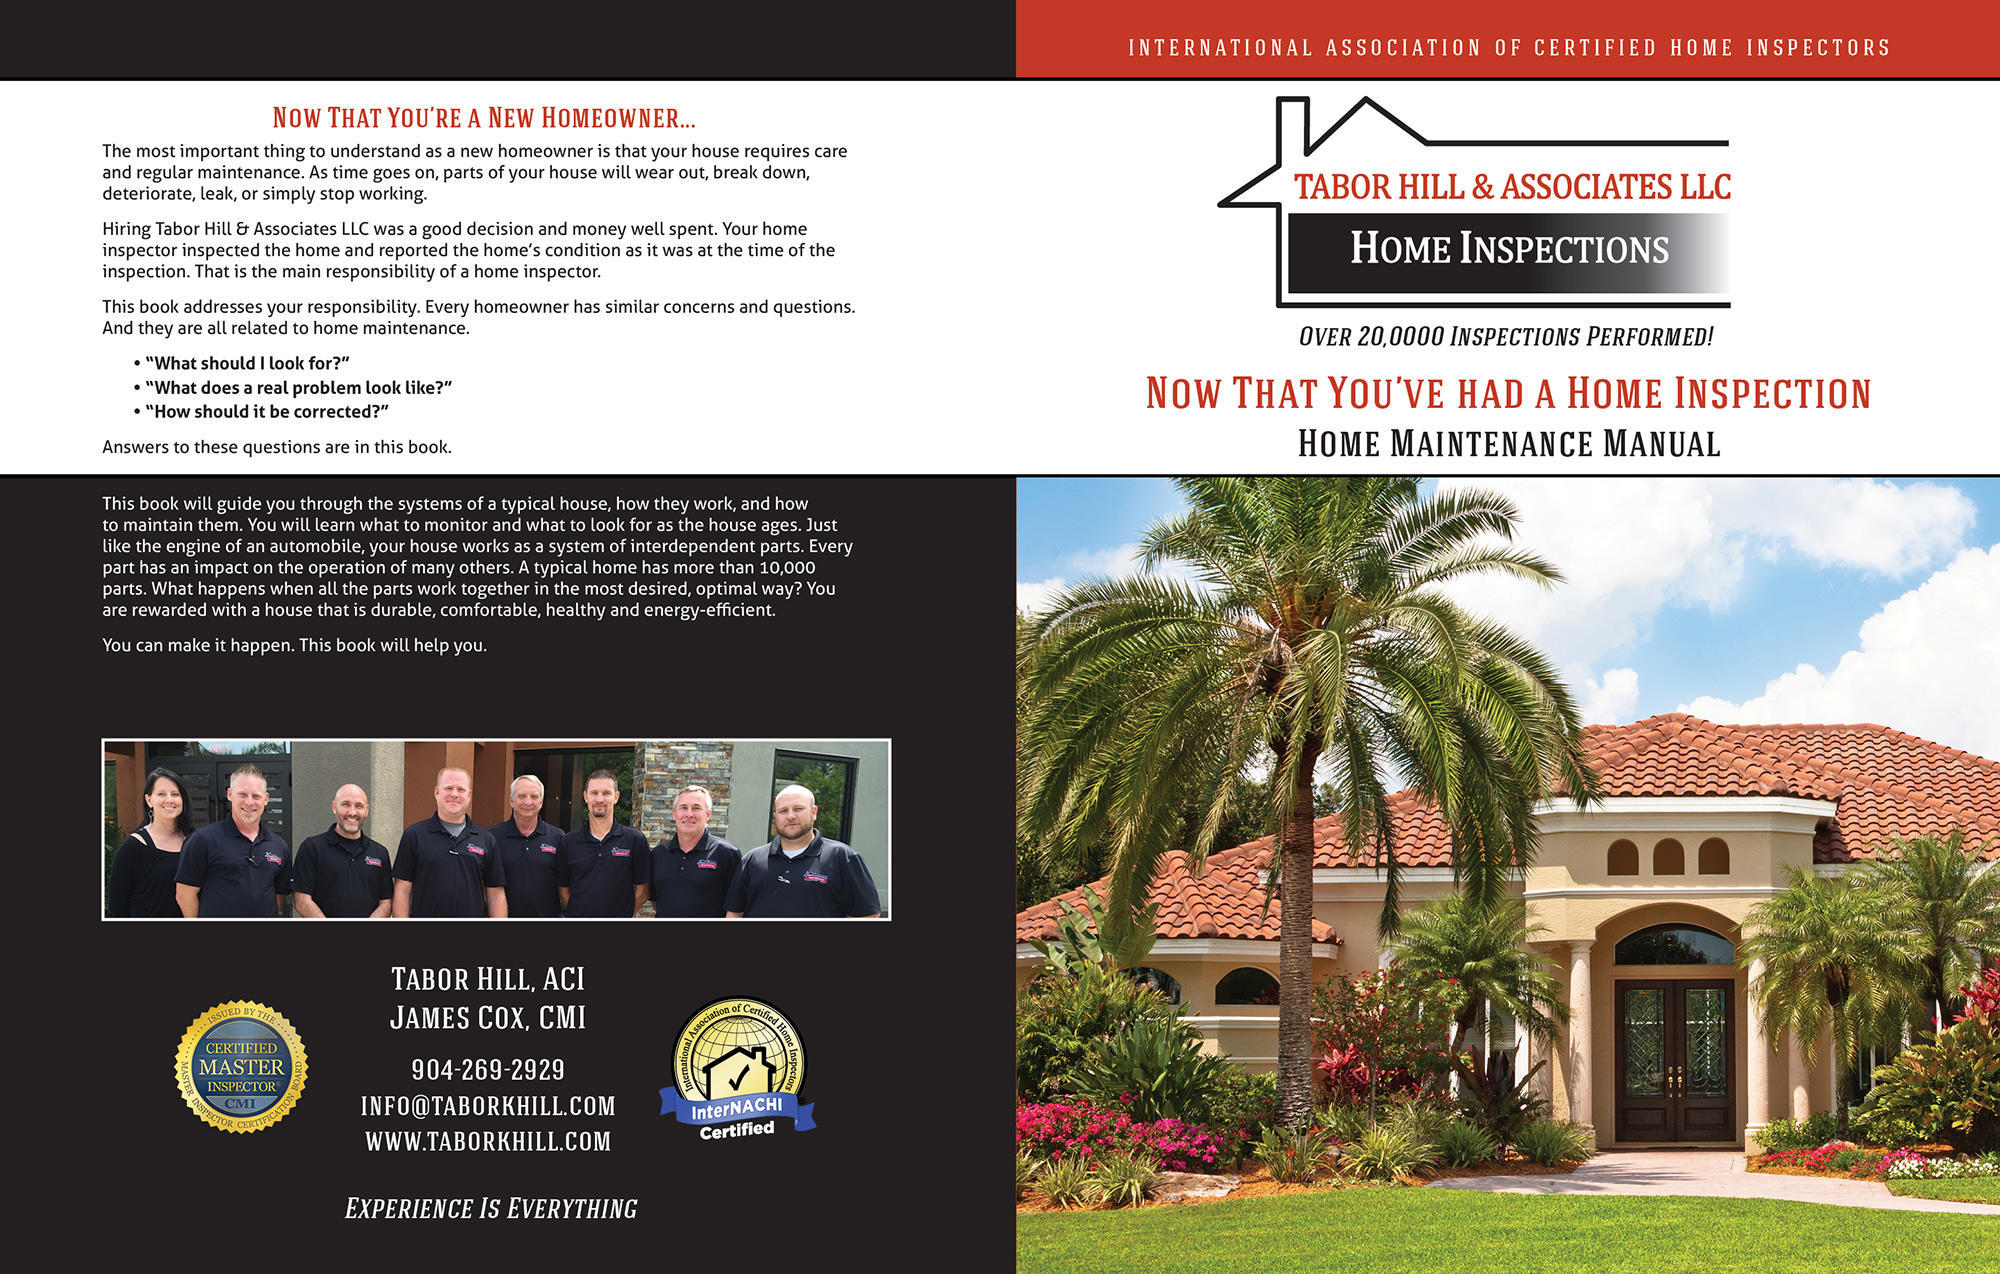 Custom Home Maintenance Book for Tabor Hill Home Inspections.